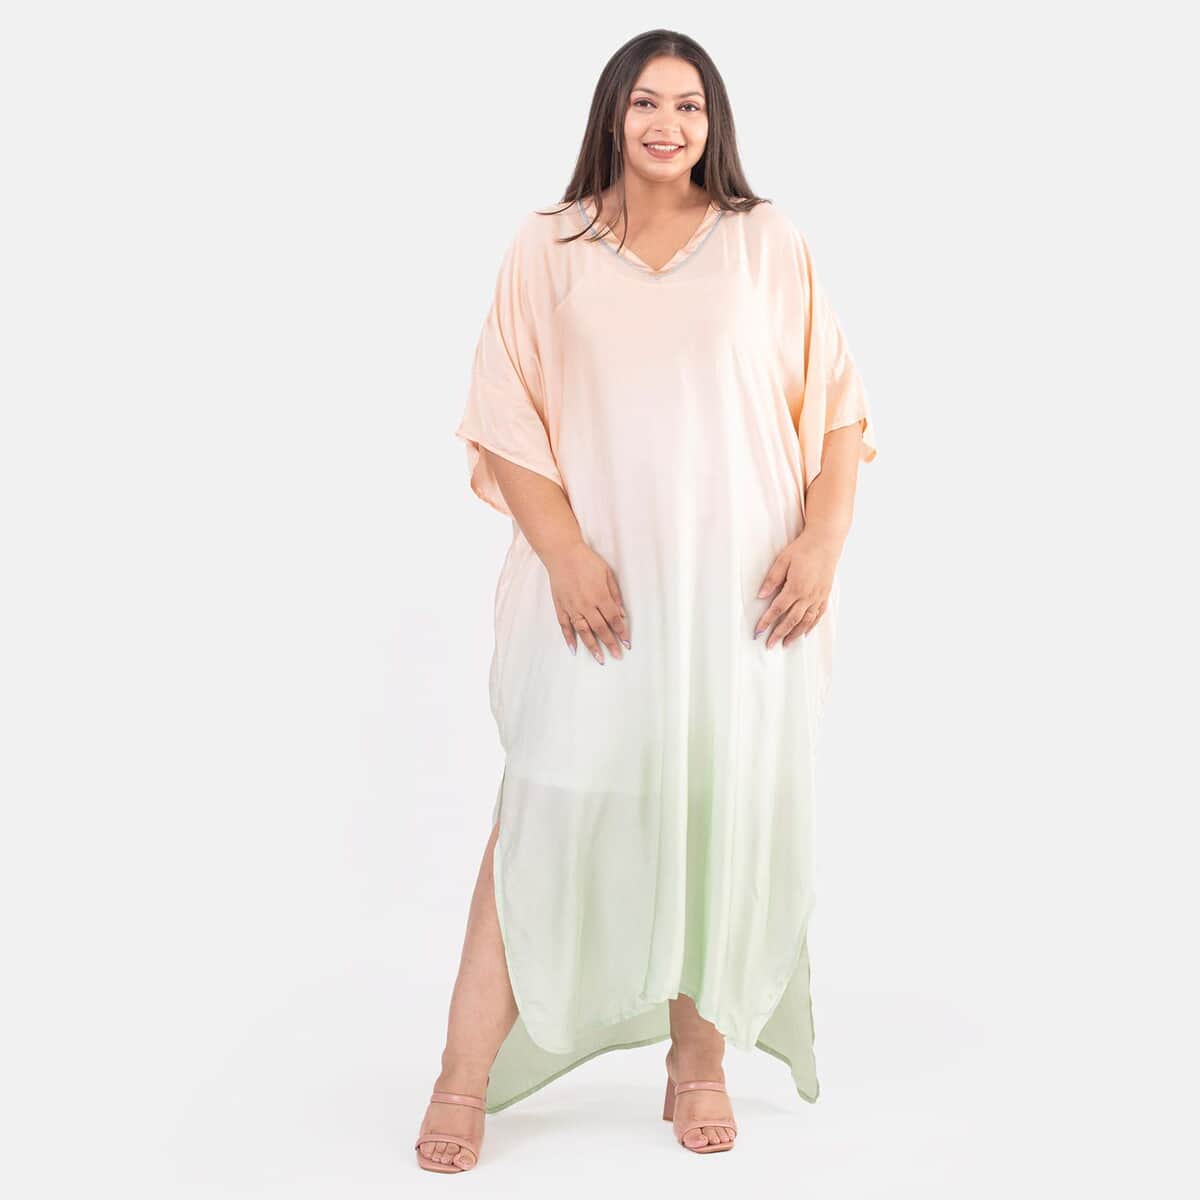 TAMSY Peach Tie-Dye Long Kaftan with Lace - One Size Fits Most image number 0